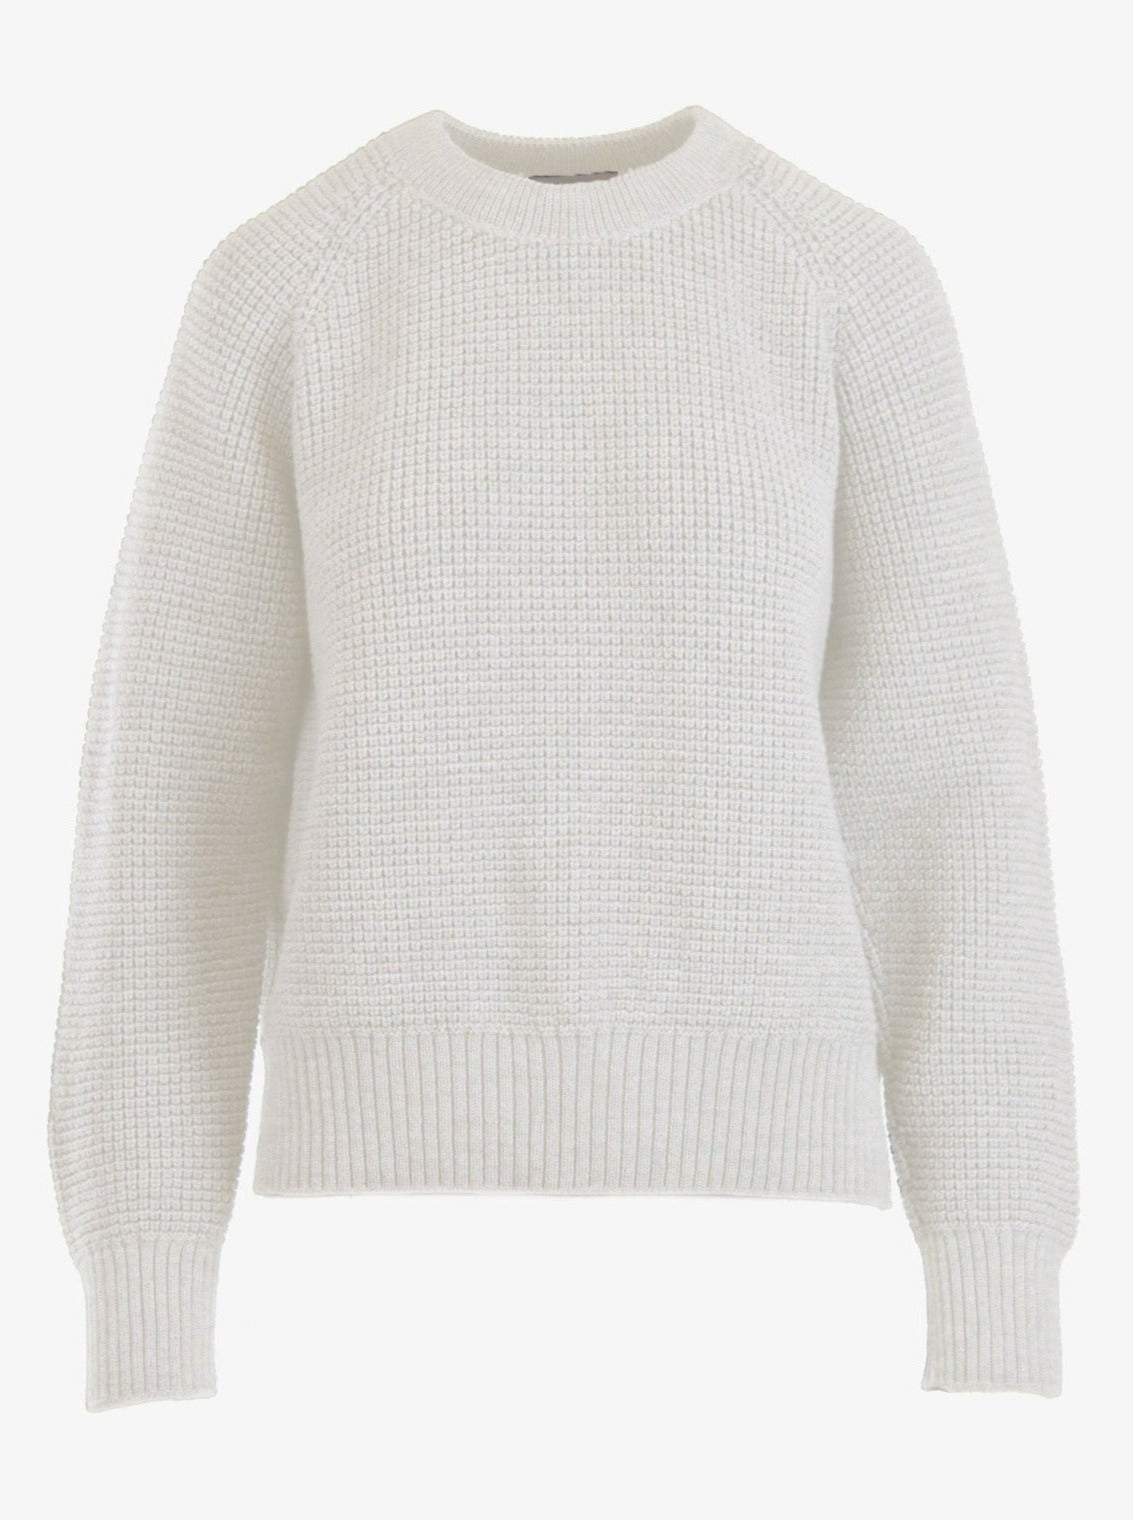 finley pearl merino 3D knit pullover sweater